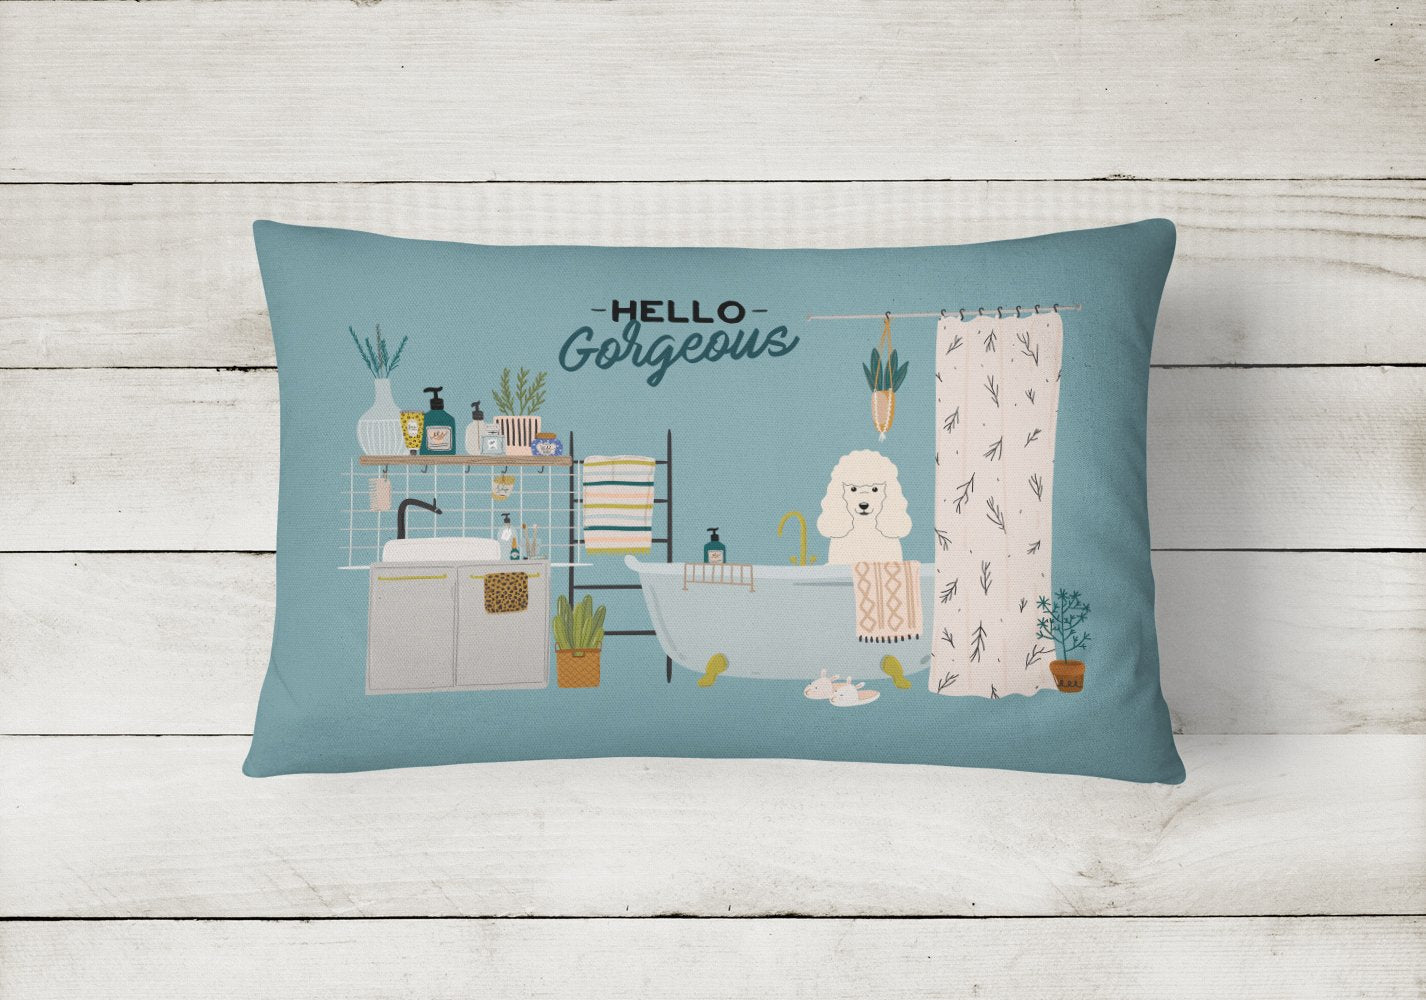 White Poodle in Bathtub Canvas Fabric Decorative Pillow CK7492PW1216 by Caroline's Treasures